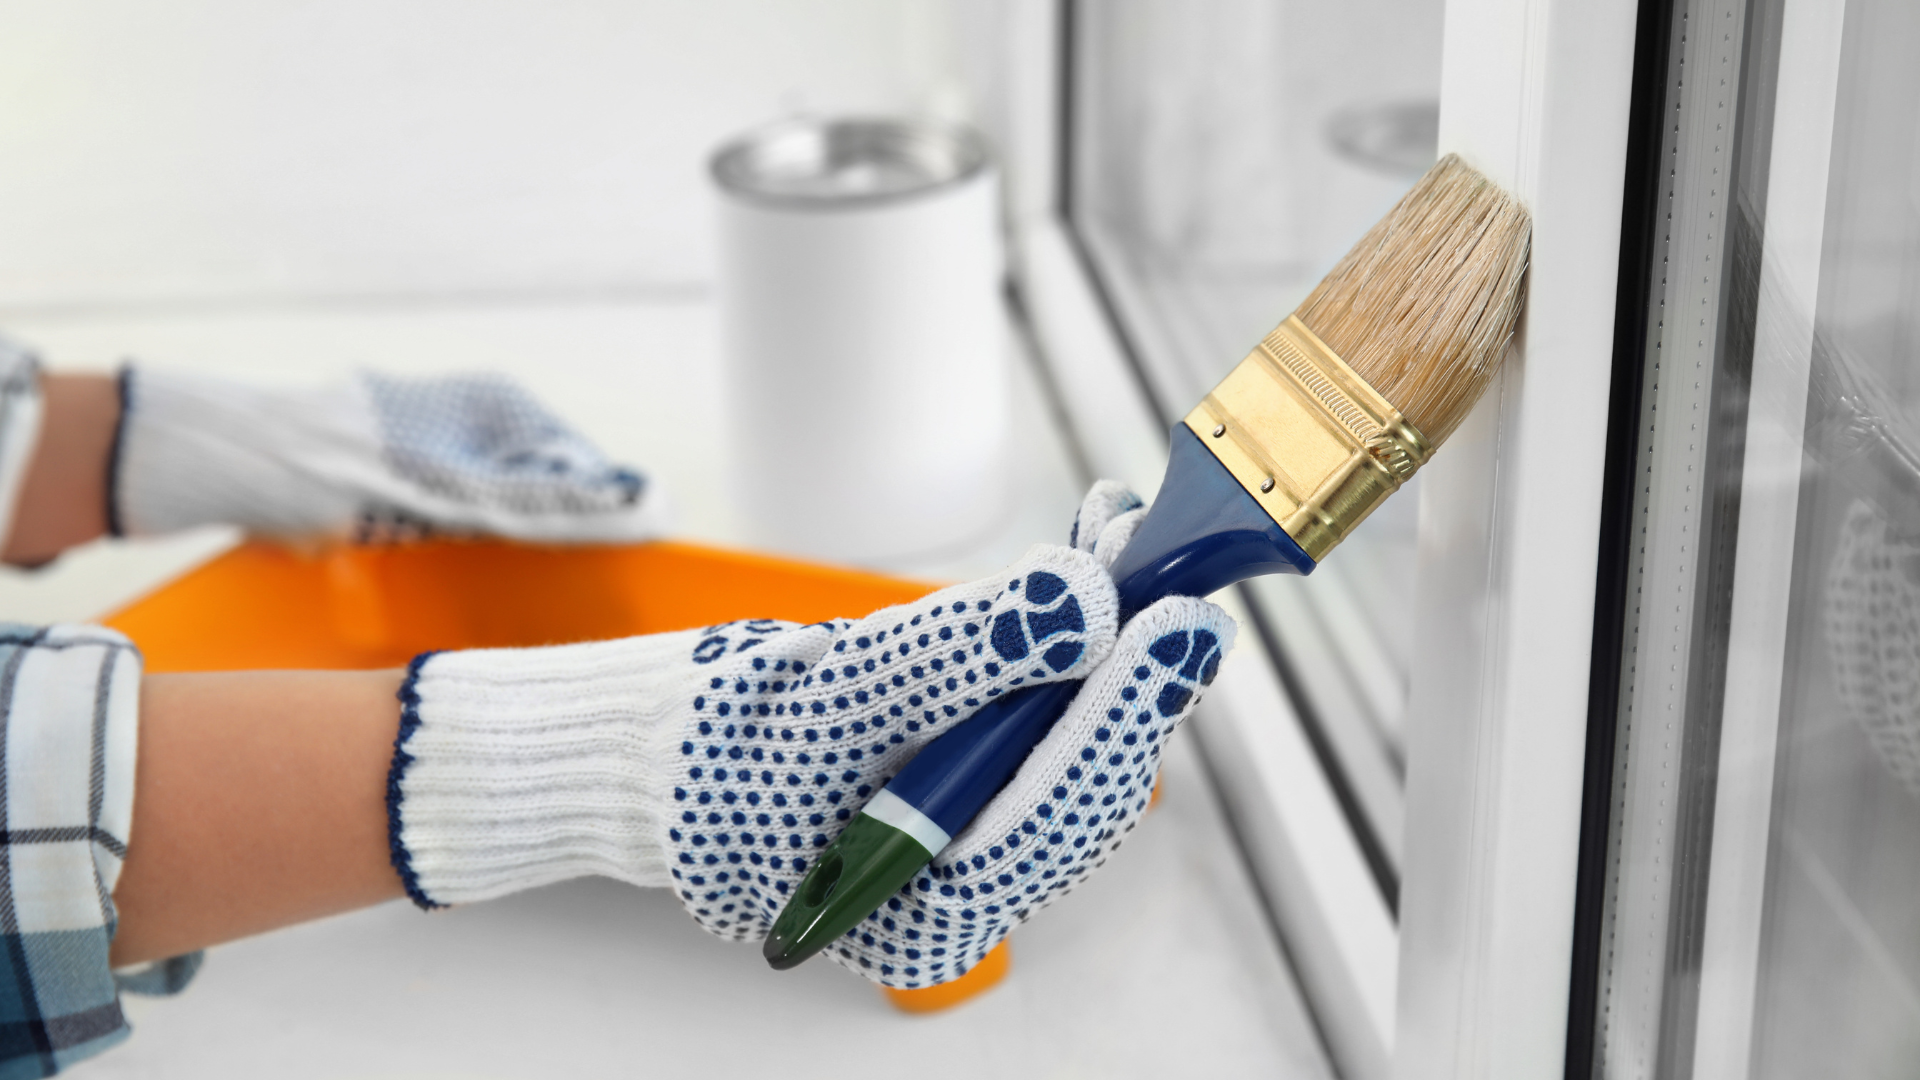 trim-and-door-painting-services-overland-park